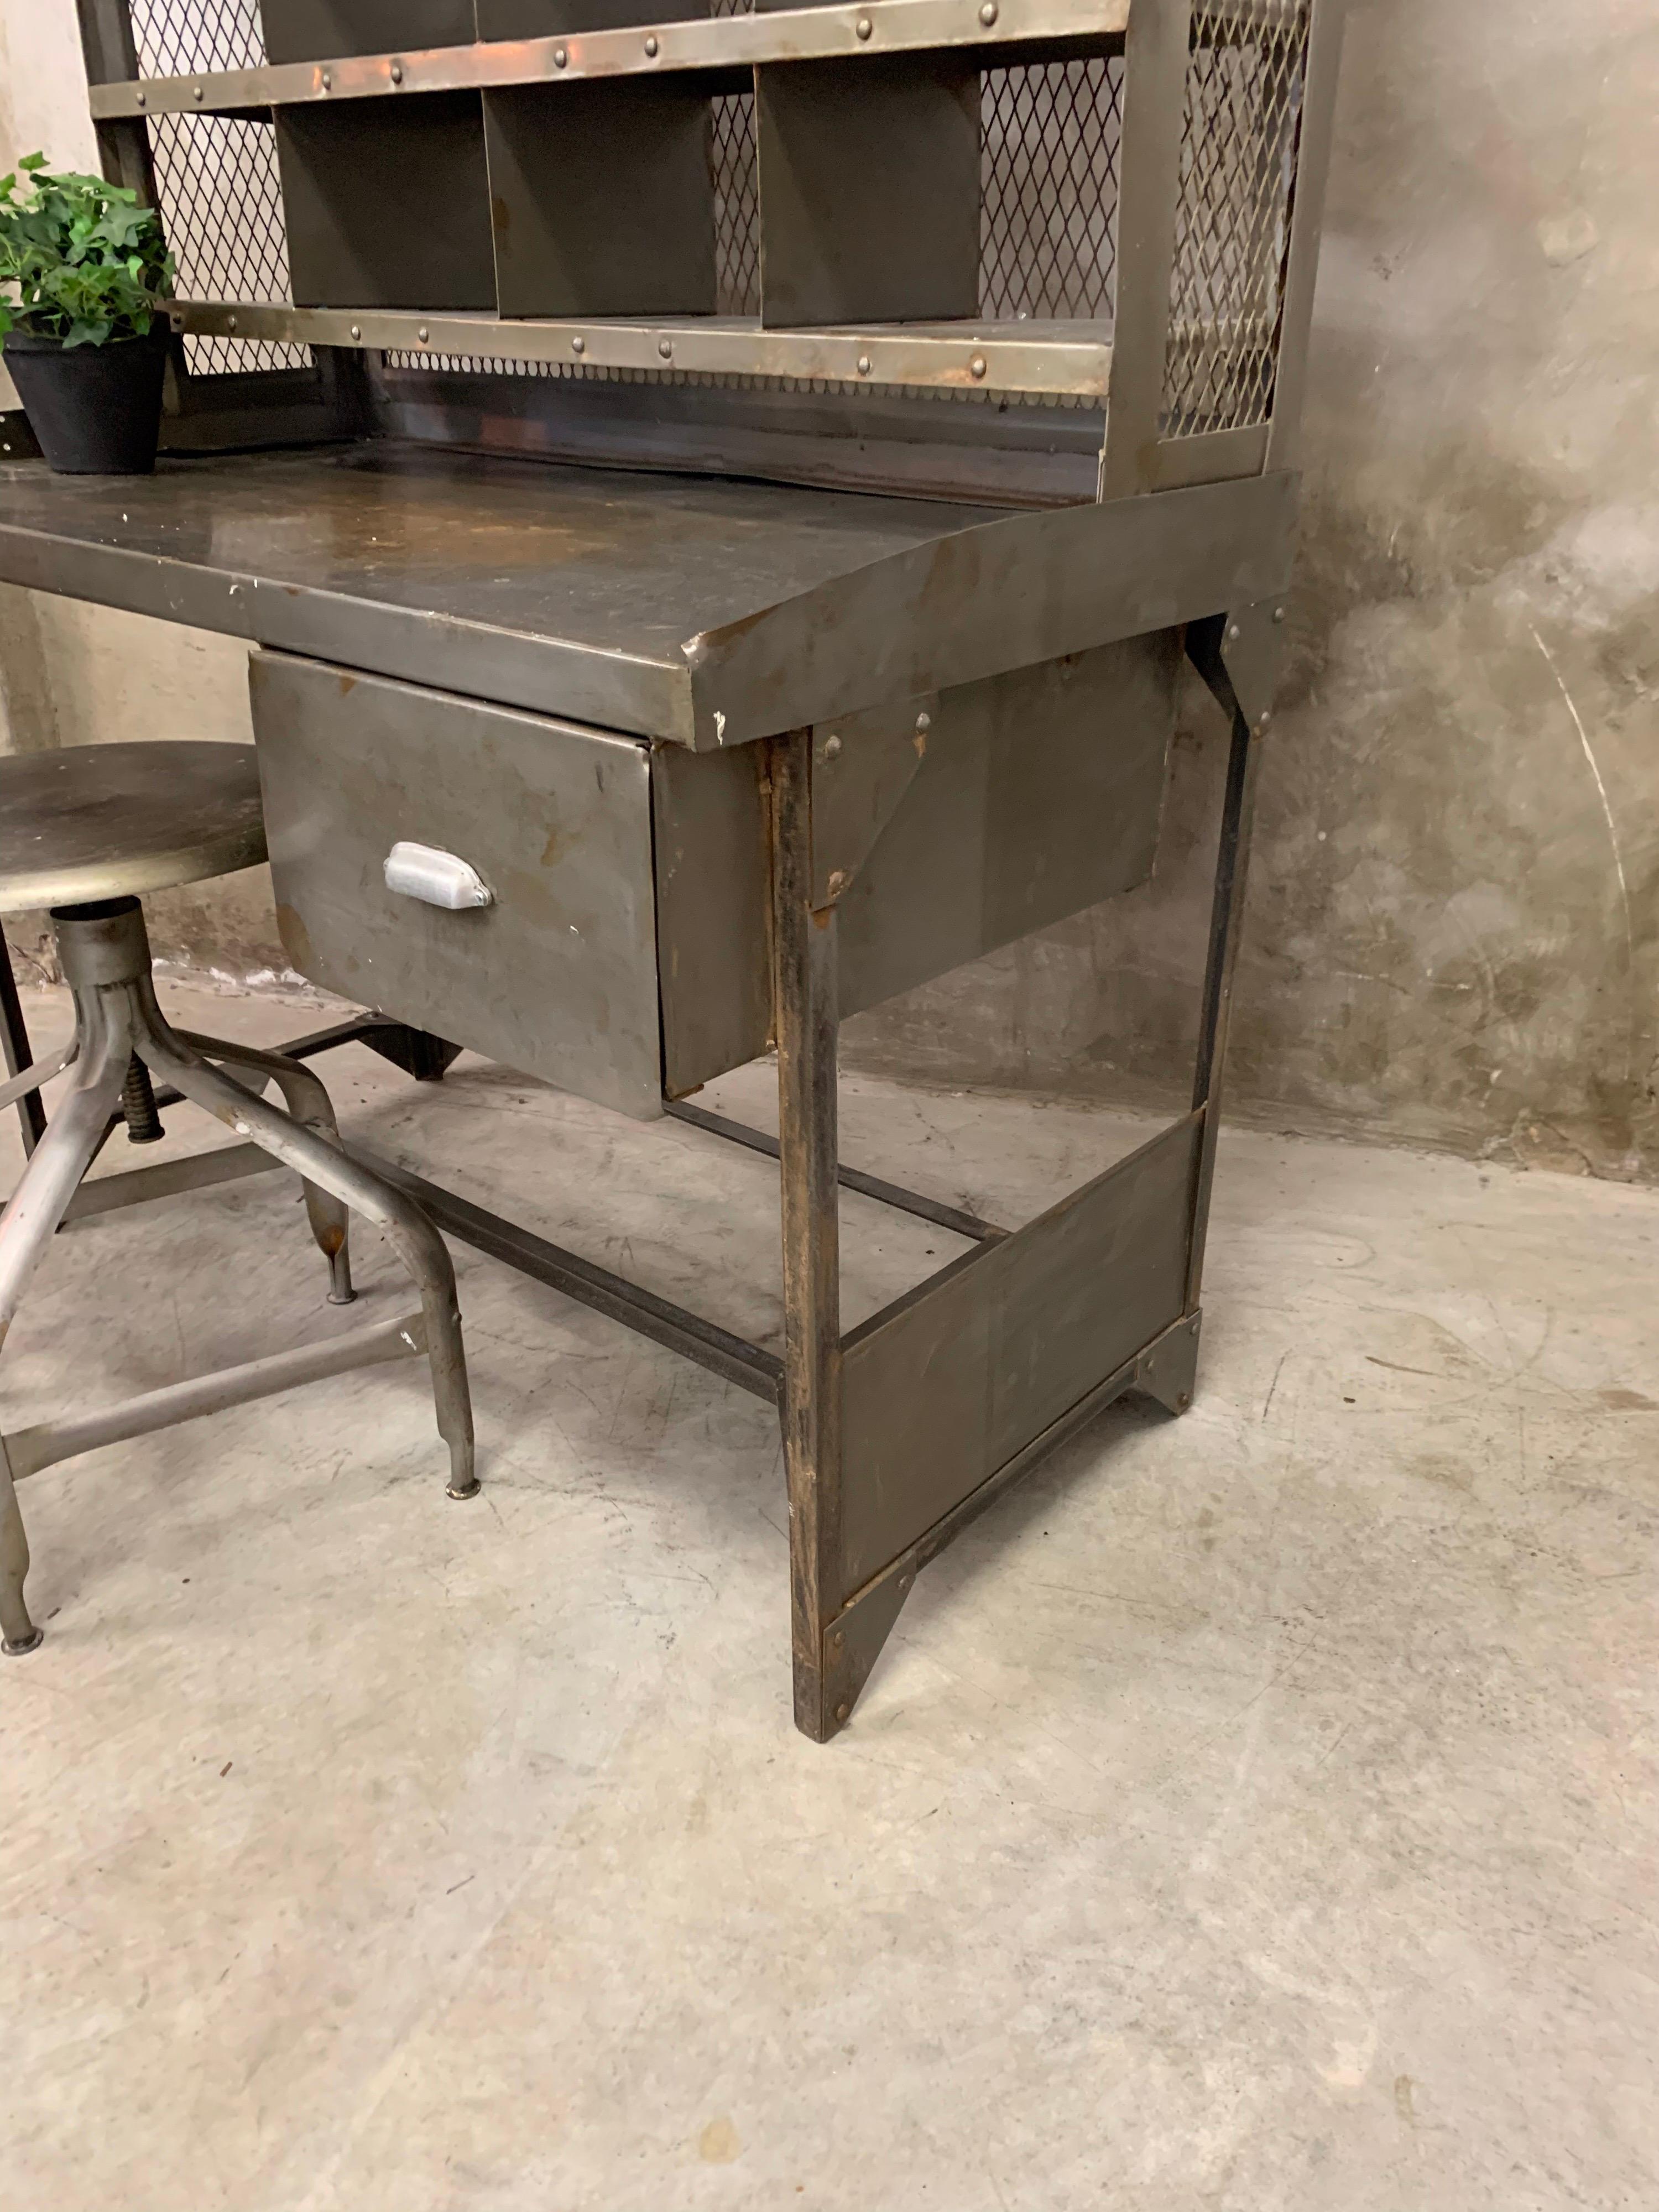 Old French postal sorting cabinet. All metal including adjustable original metal seat. Dating from the 1950s and are rare to find. The cabinet itself consists of 2 parts. Stands separately, but can also be screwed in if necessary (screws not